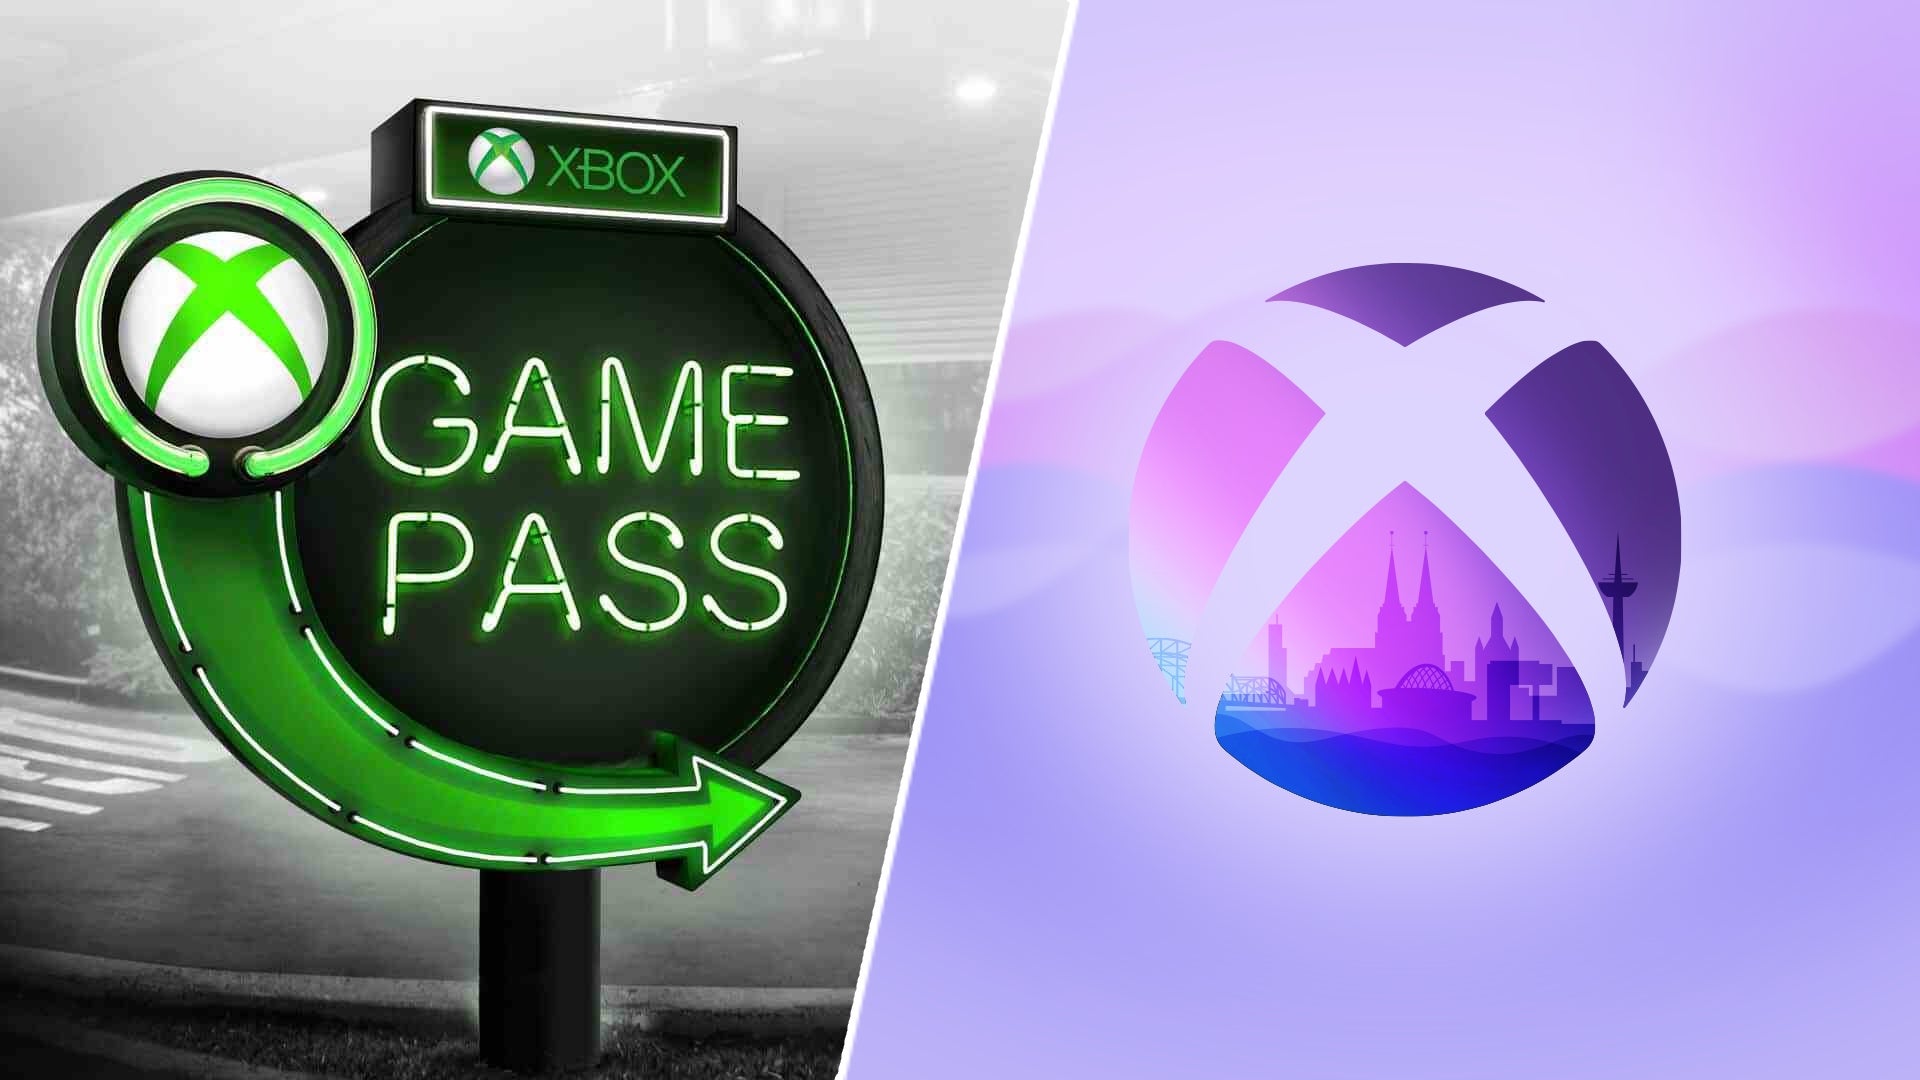 Image for On paper, Xbox’s Gamescom show  was nothing to shout about. But in person, it showcased the power of Game Pass